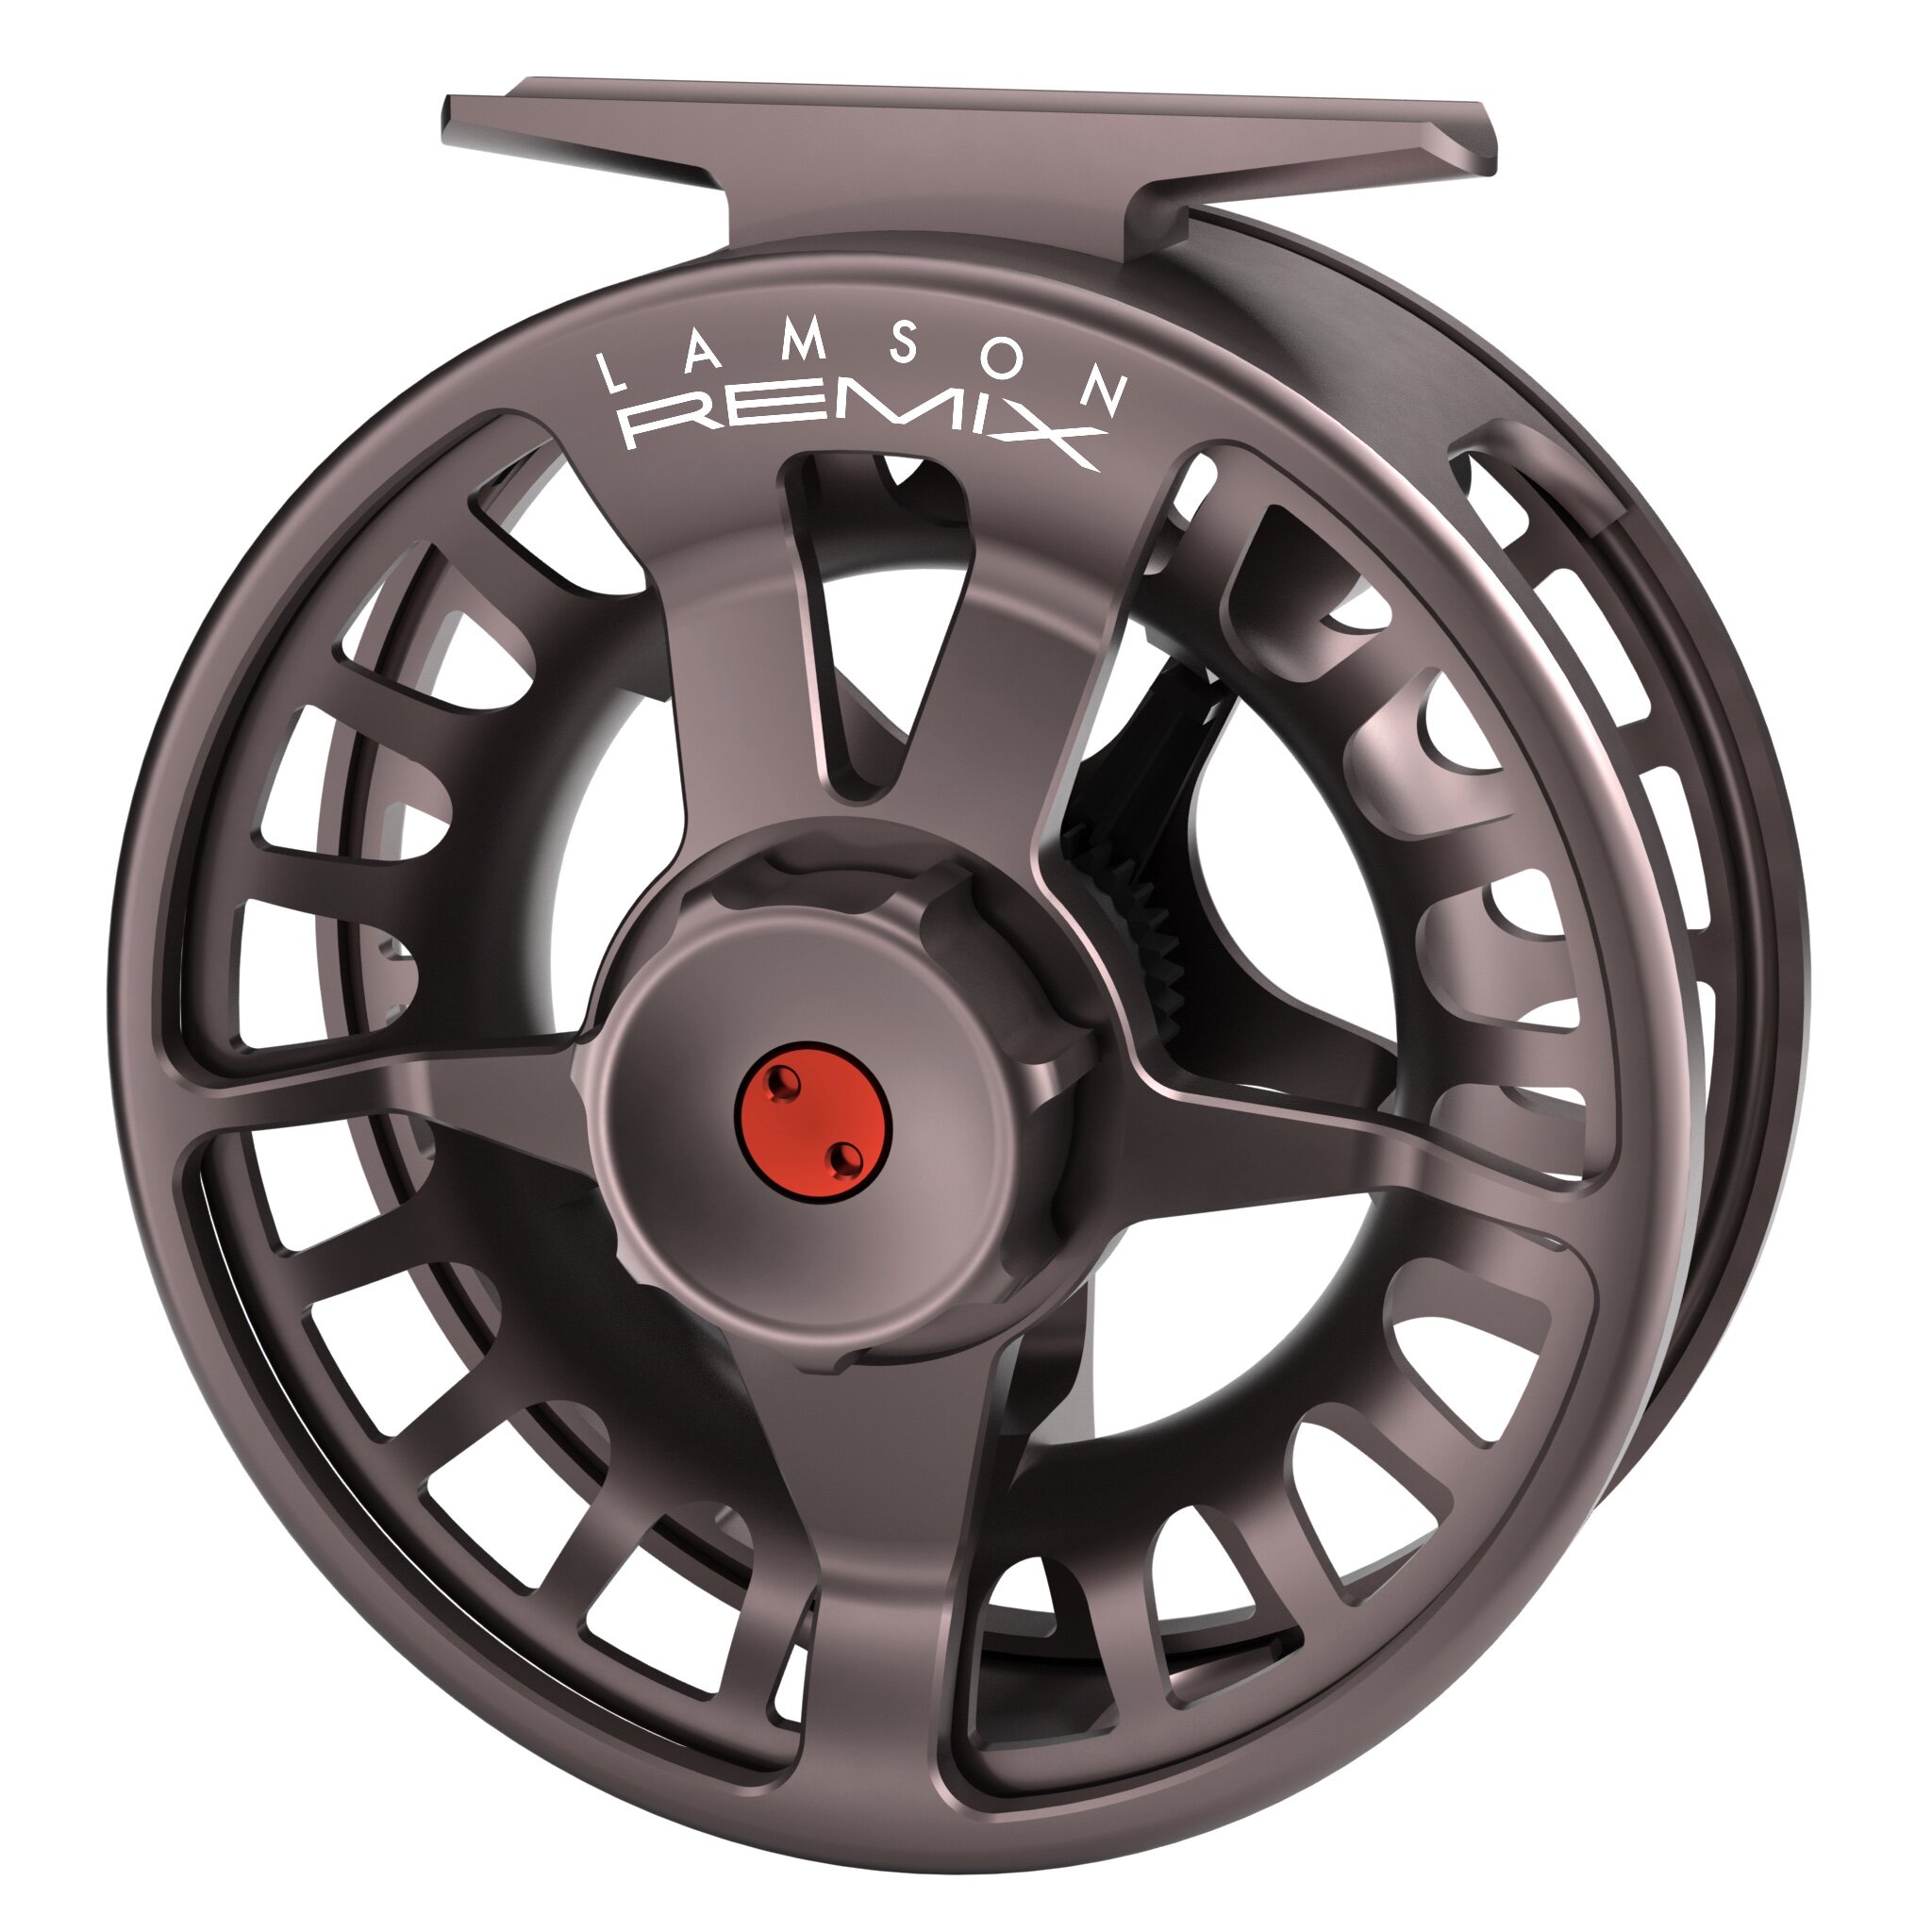 SALE! Lamson REMIX HD Fly Fishing Reels — Rogue Valley Anglers